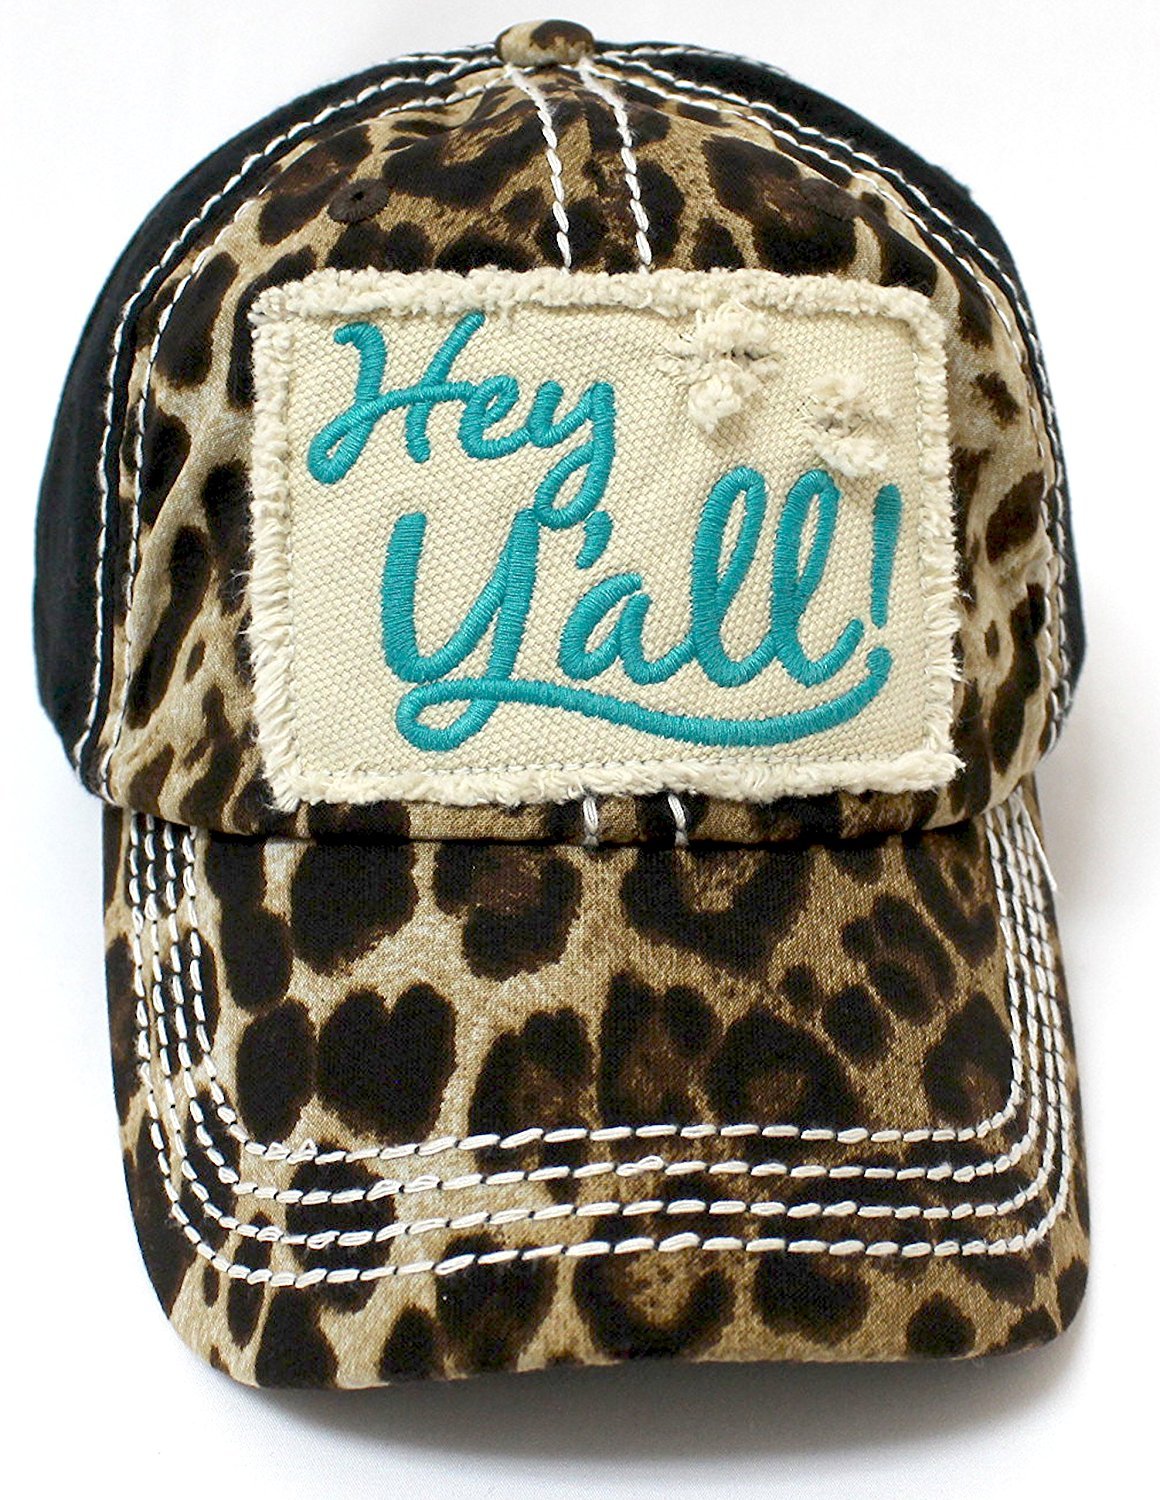 LEOPARD & TURQUOISE "Hey Y'all!" Patch Embroidery Cap/ Vintage Hat - Caps 'N Vintage 